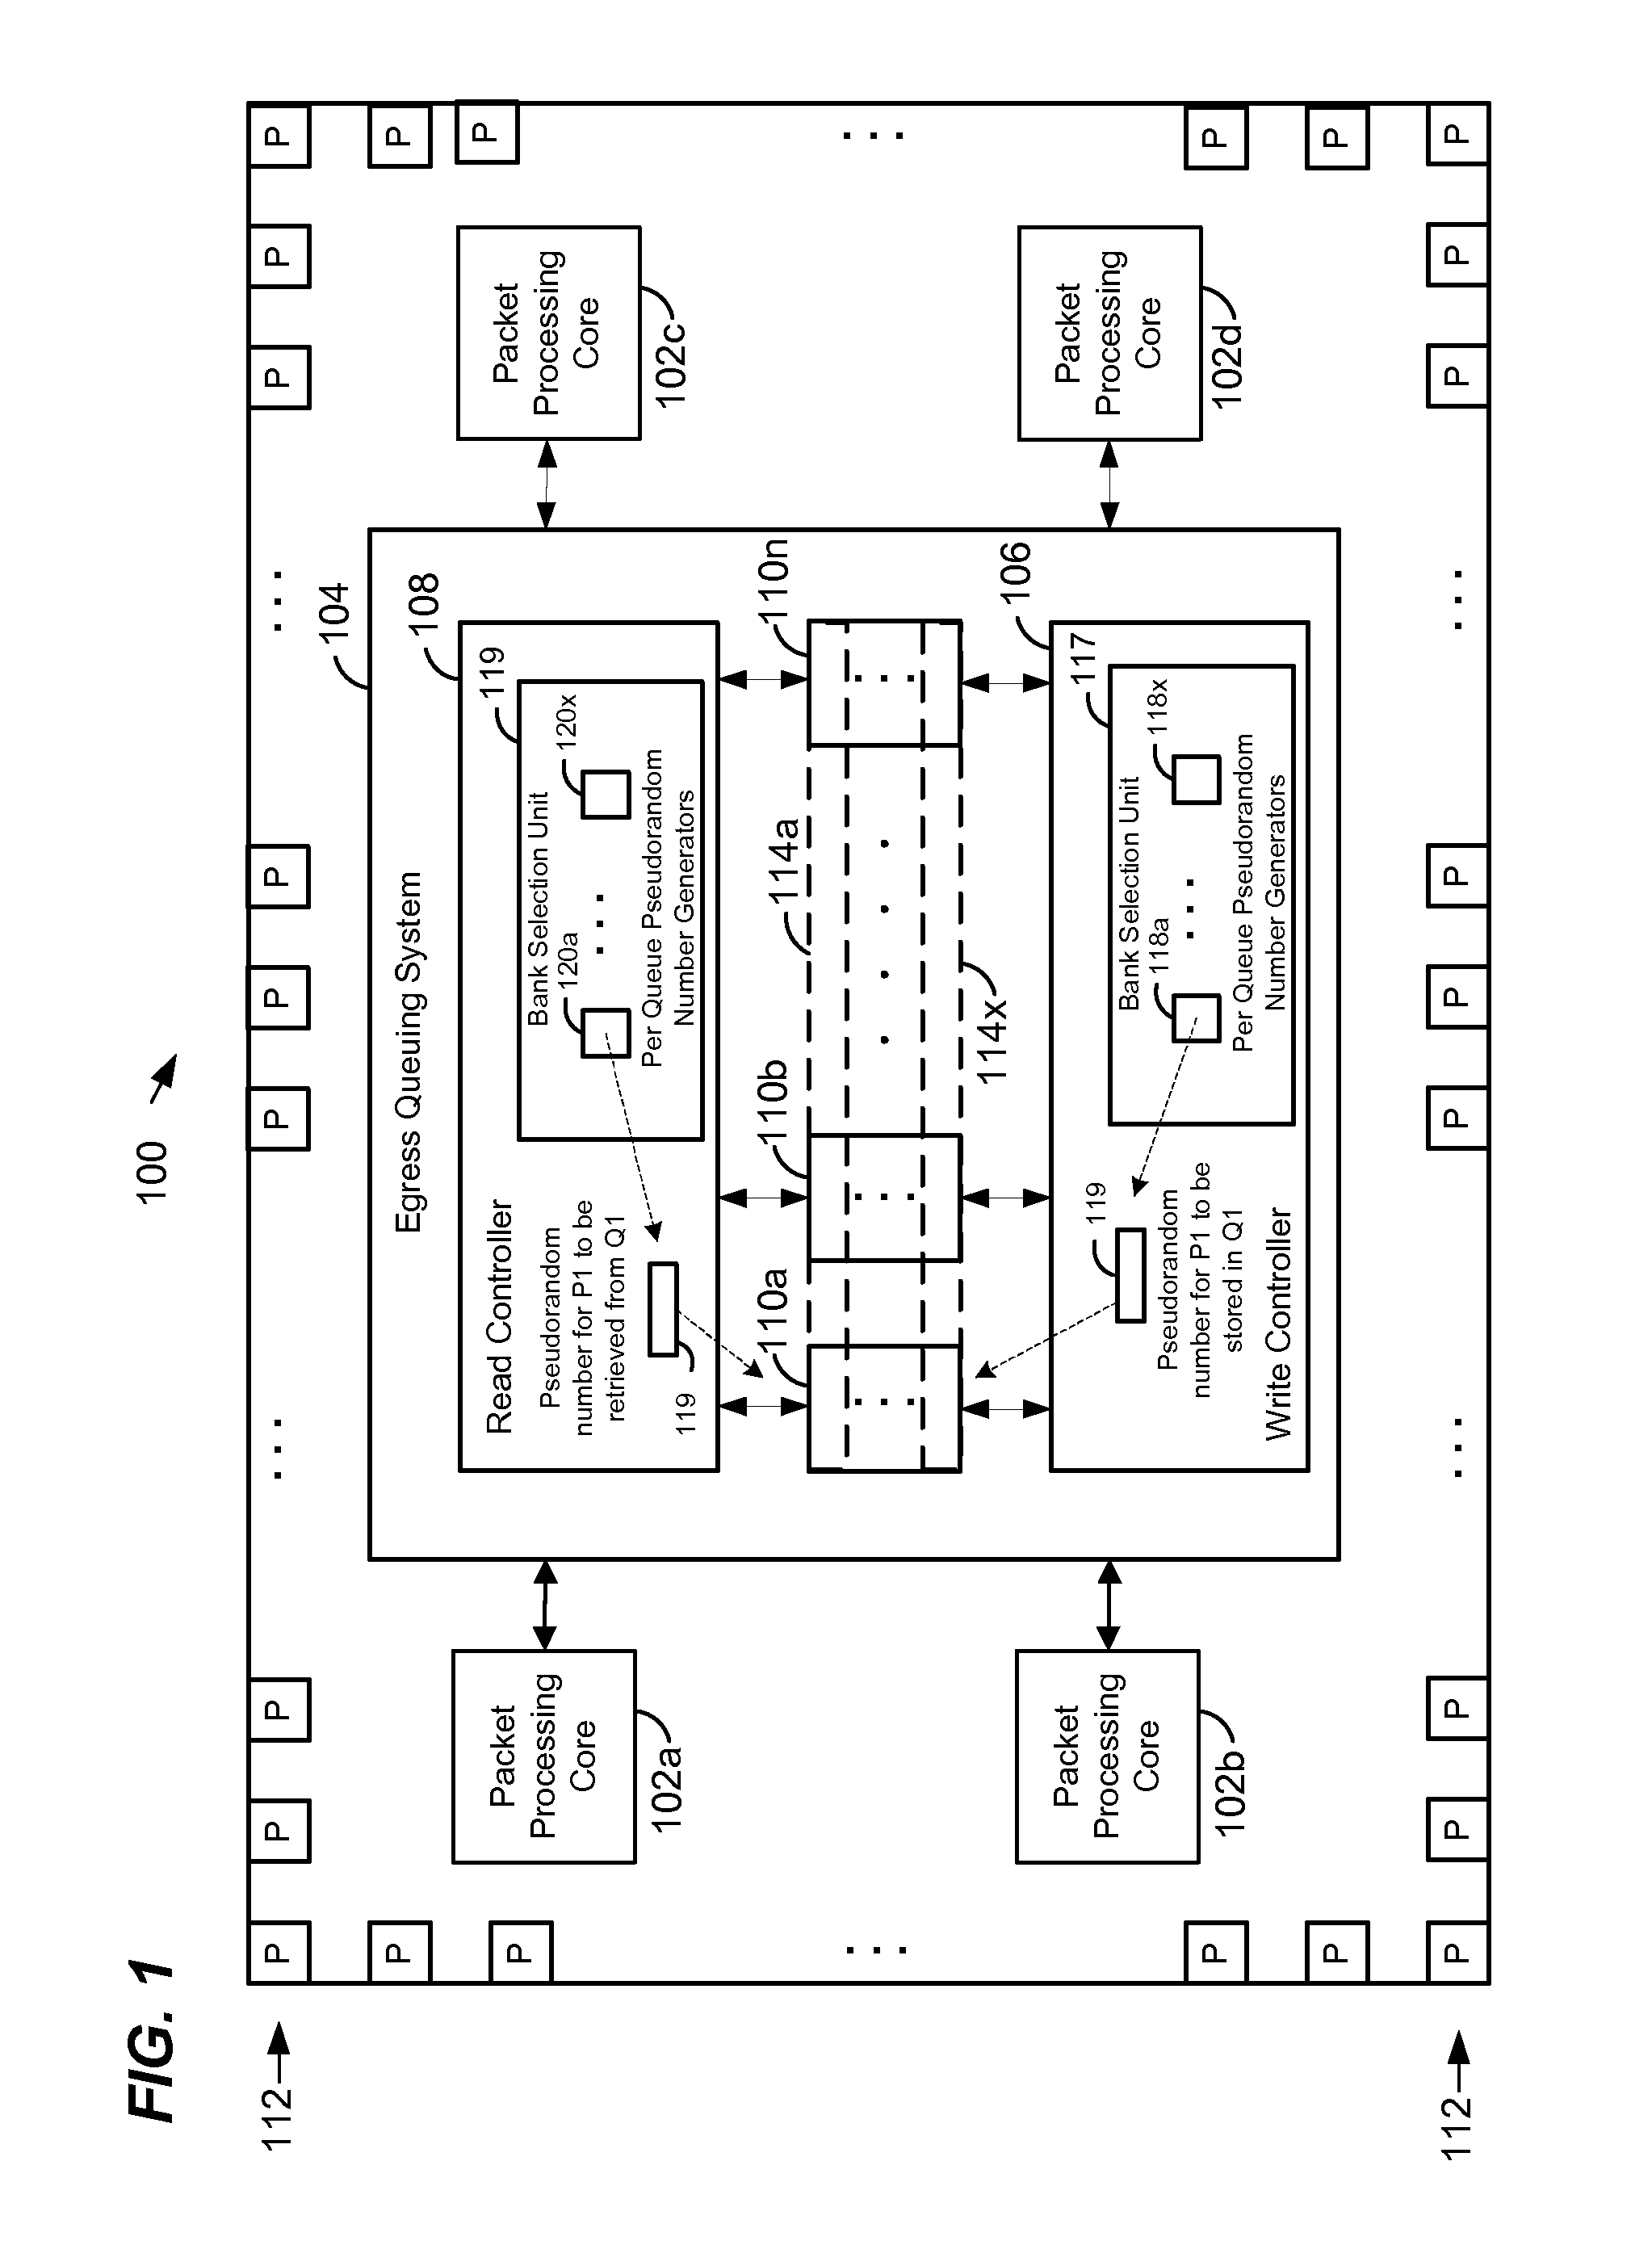 Multibank egress queuing system in a network device